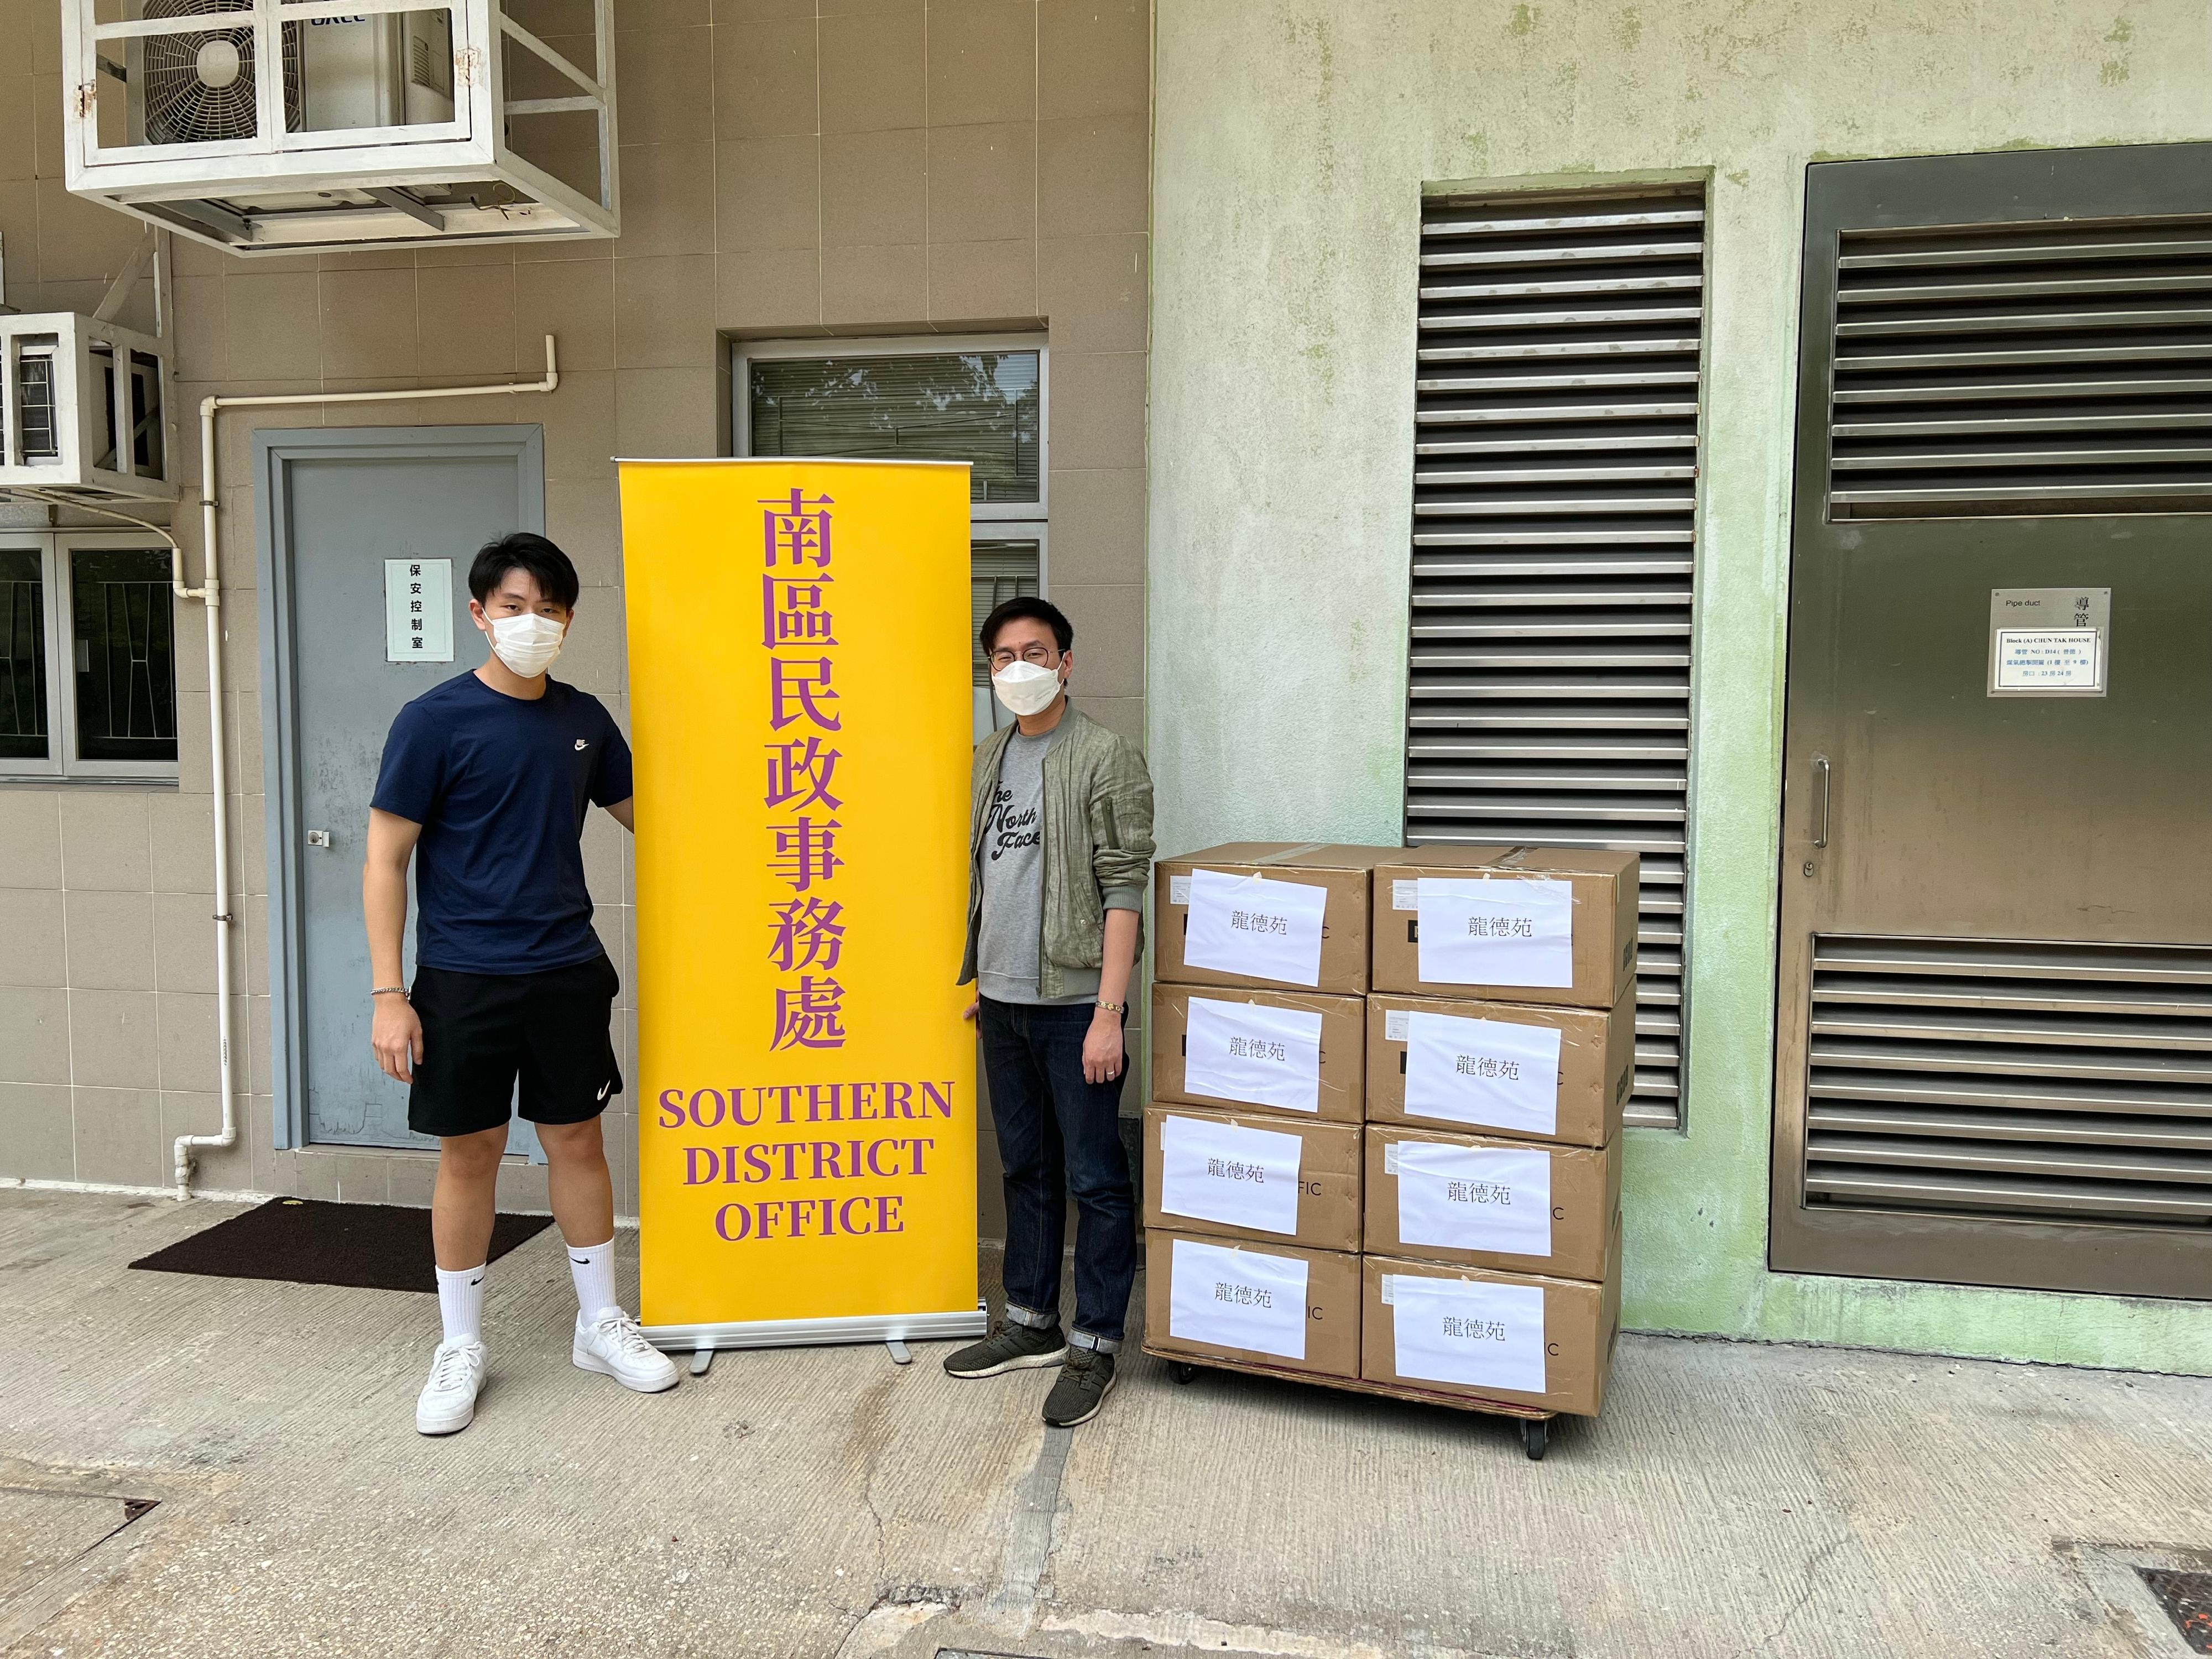 The Southern District Office today (April 29) distributed COVID-19 rapid test kits to households, cleansing workers and property management staff living and working in Lung Tak Court for voluntary testing through the property management company.